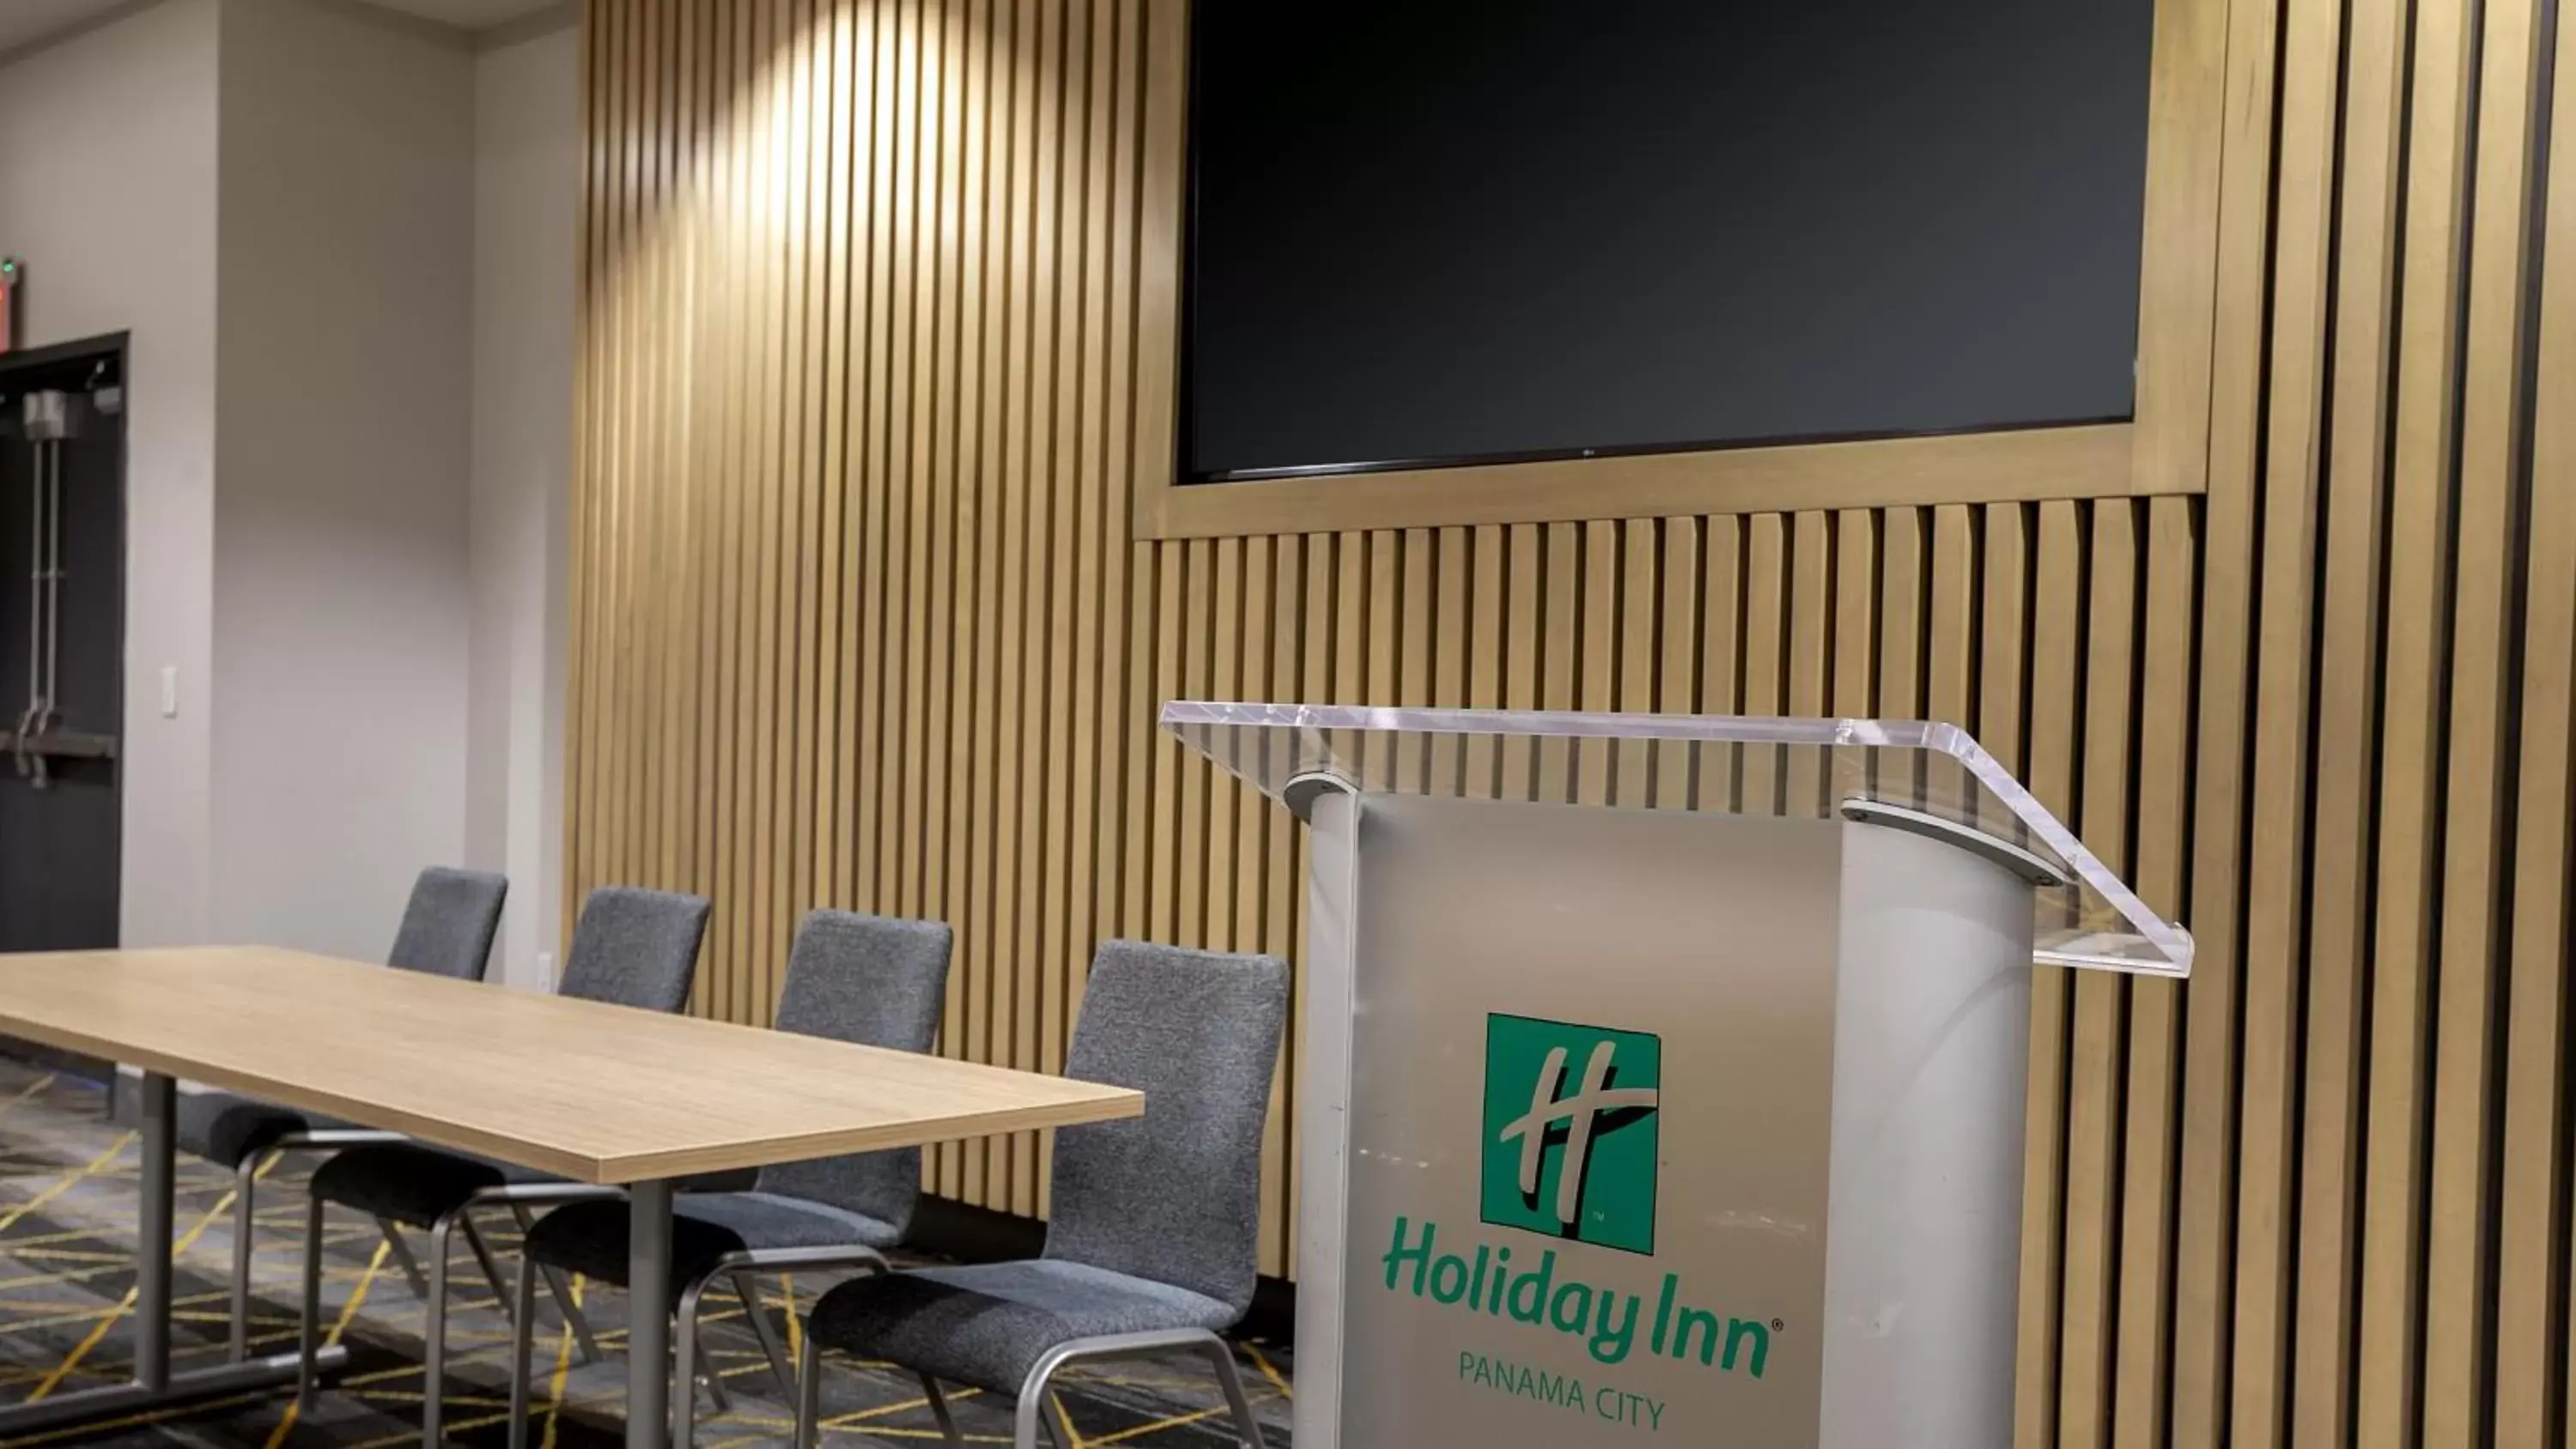 Meeting/conference room in Holiday Inn Panama City, an IHG Hotel